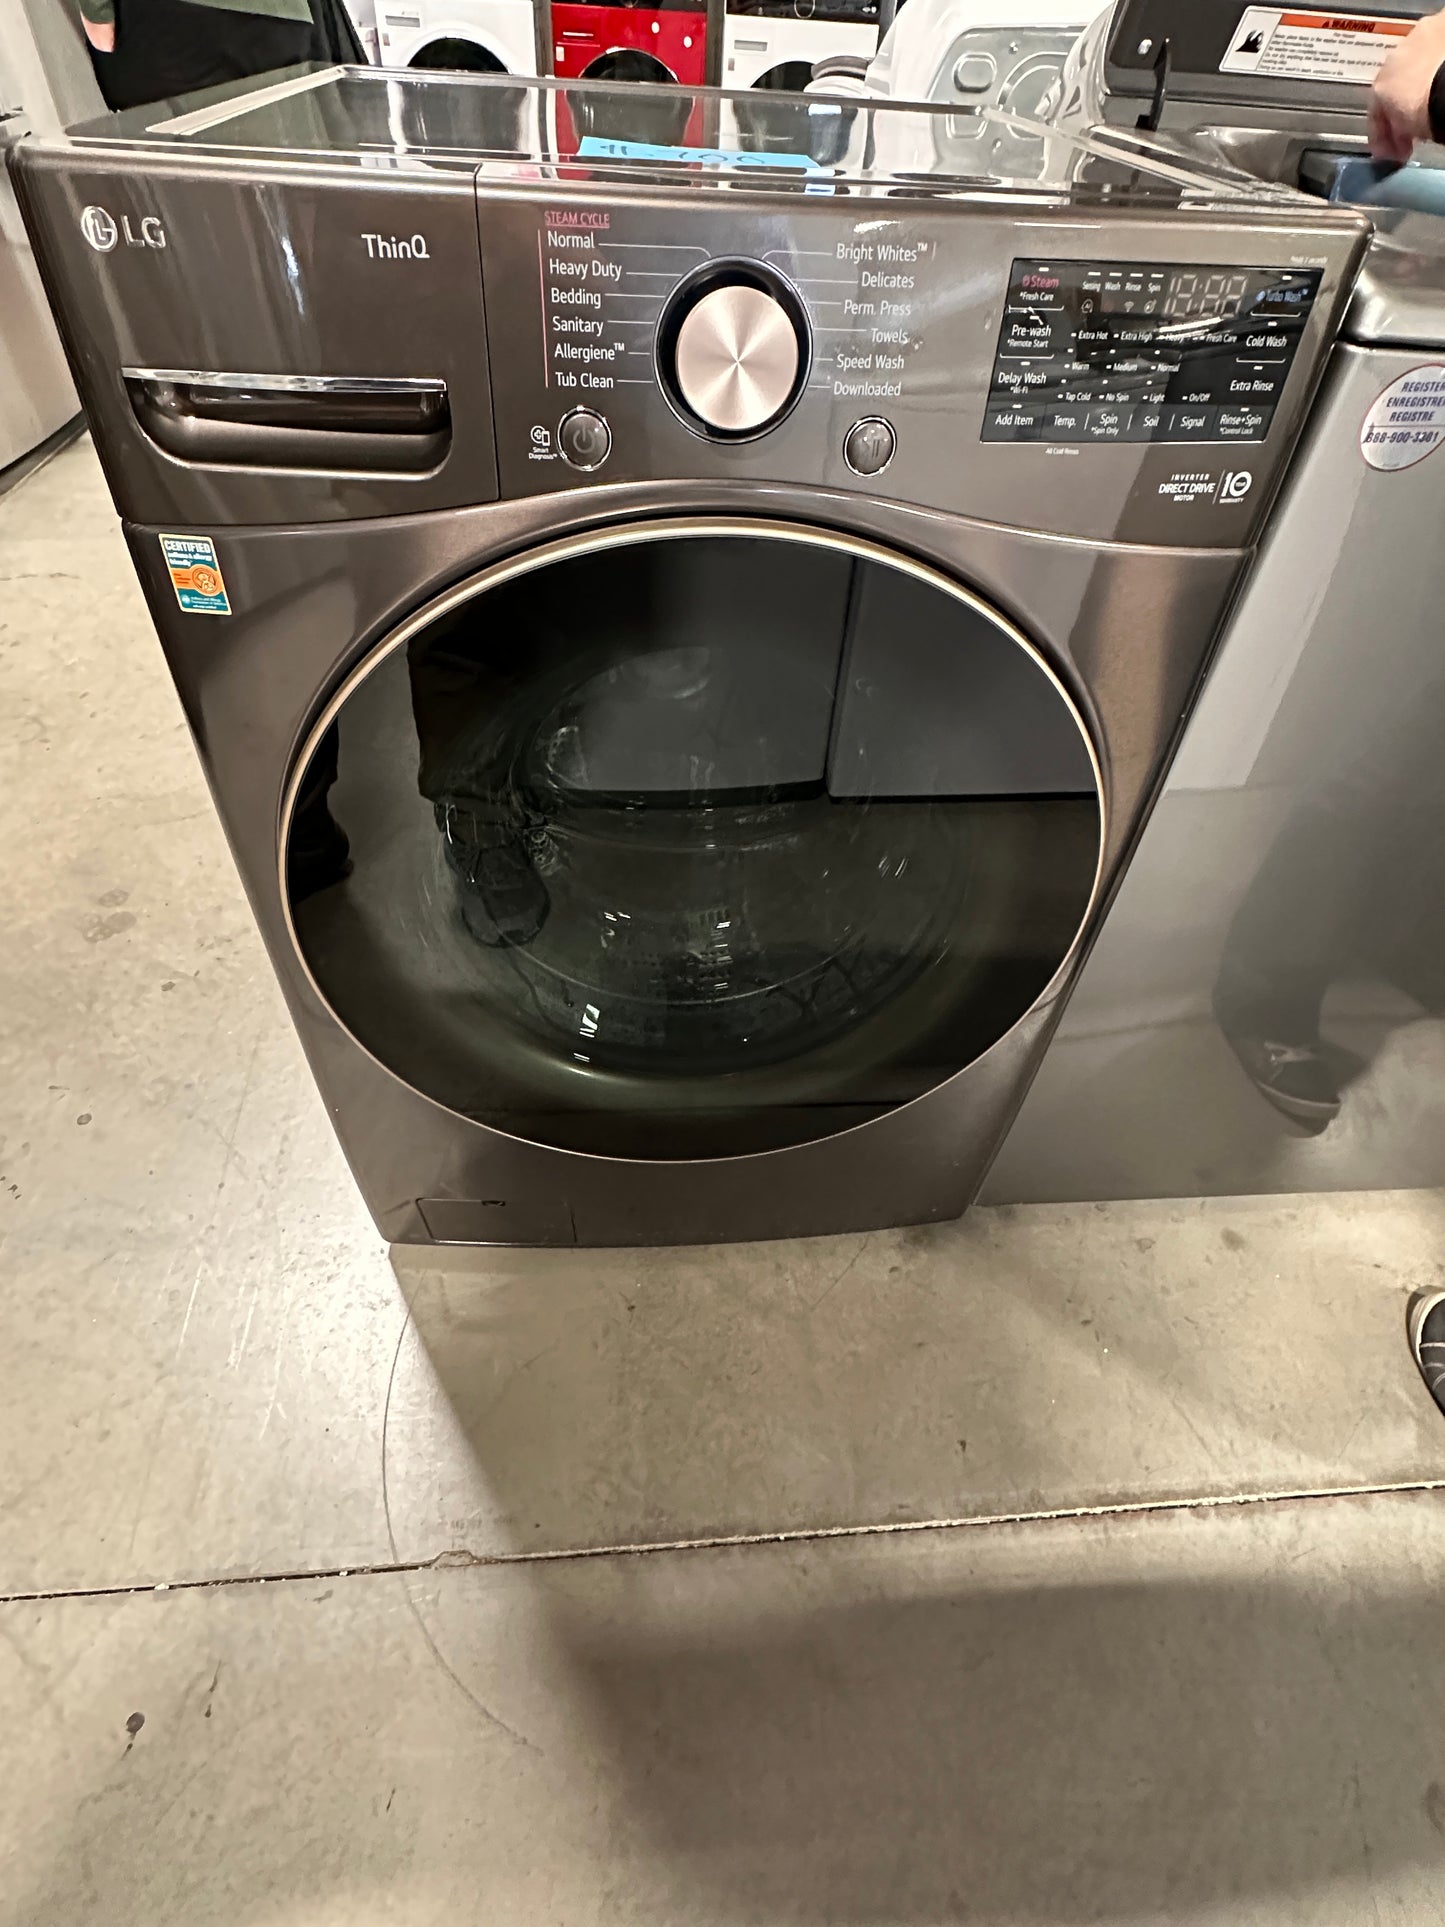 NEW BLACK STEEL LG FRONT LOAD WASHER - WAS12828